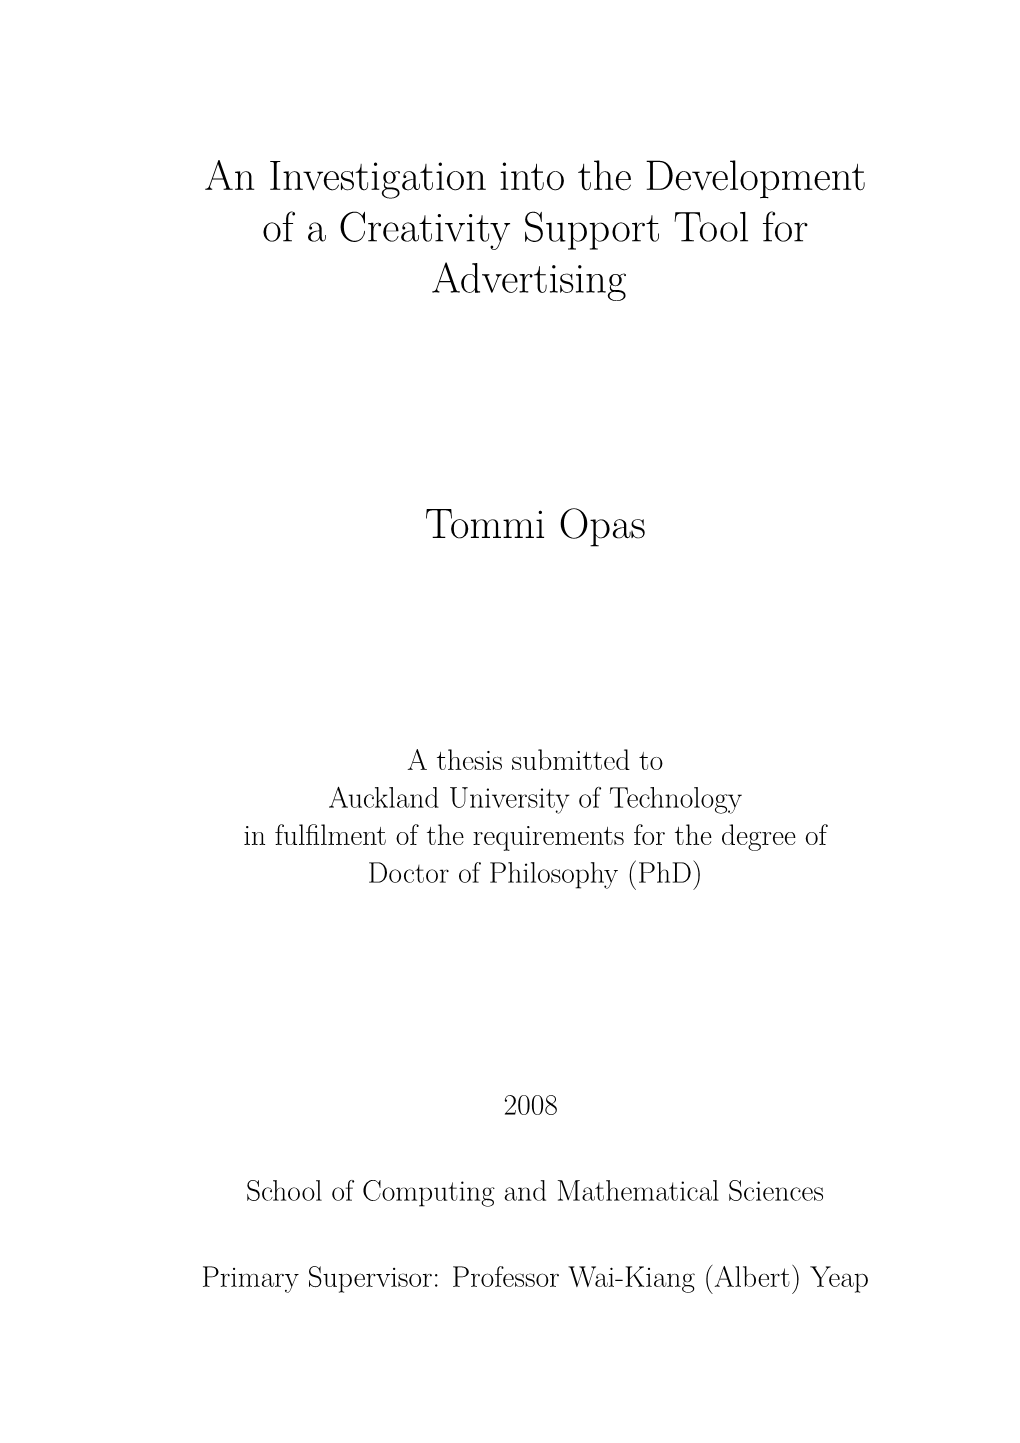 An Investigation Into the Development of a Creativity Support Tool for Advertising Tommi Opas